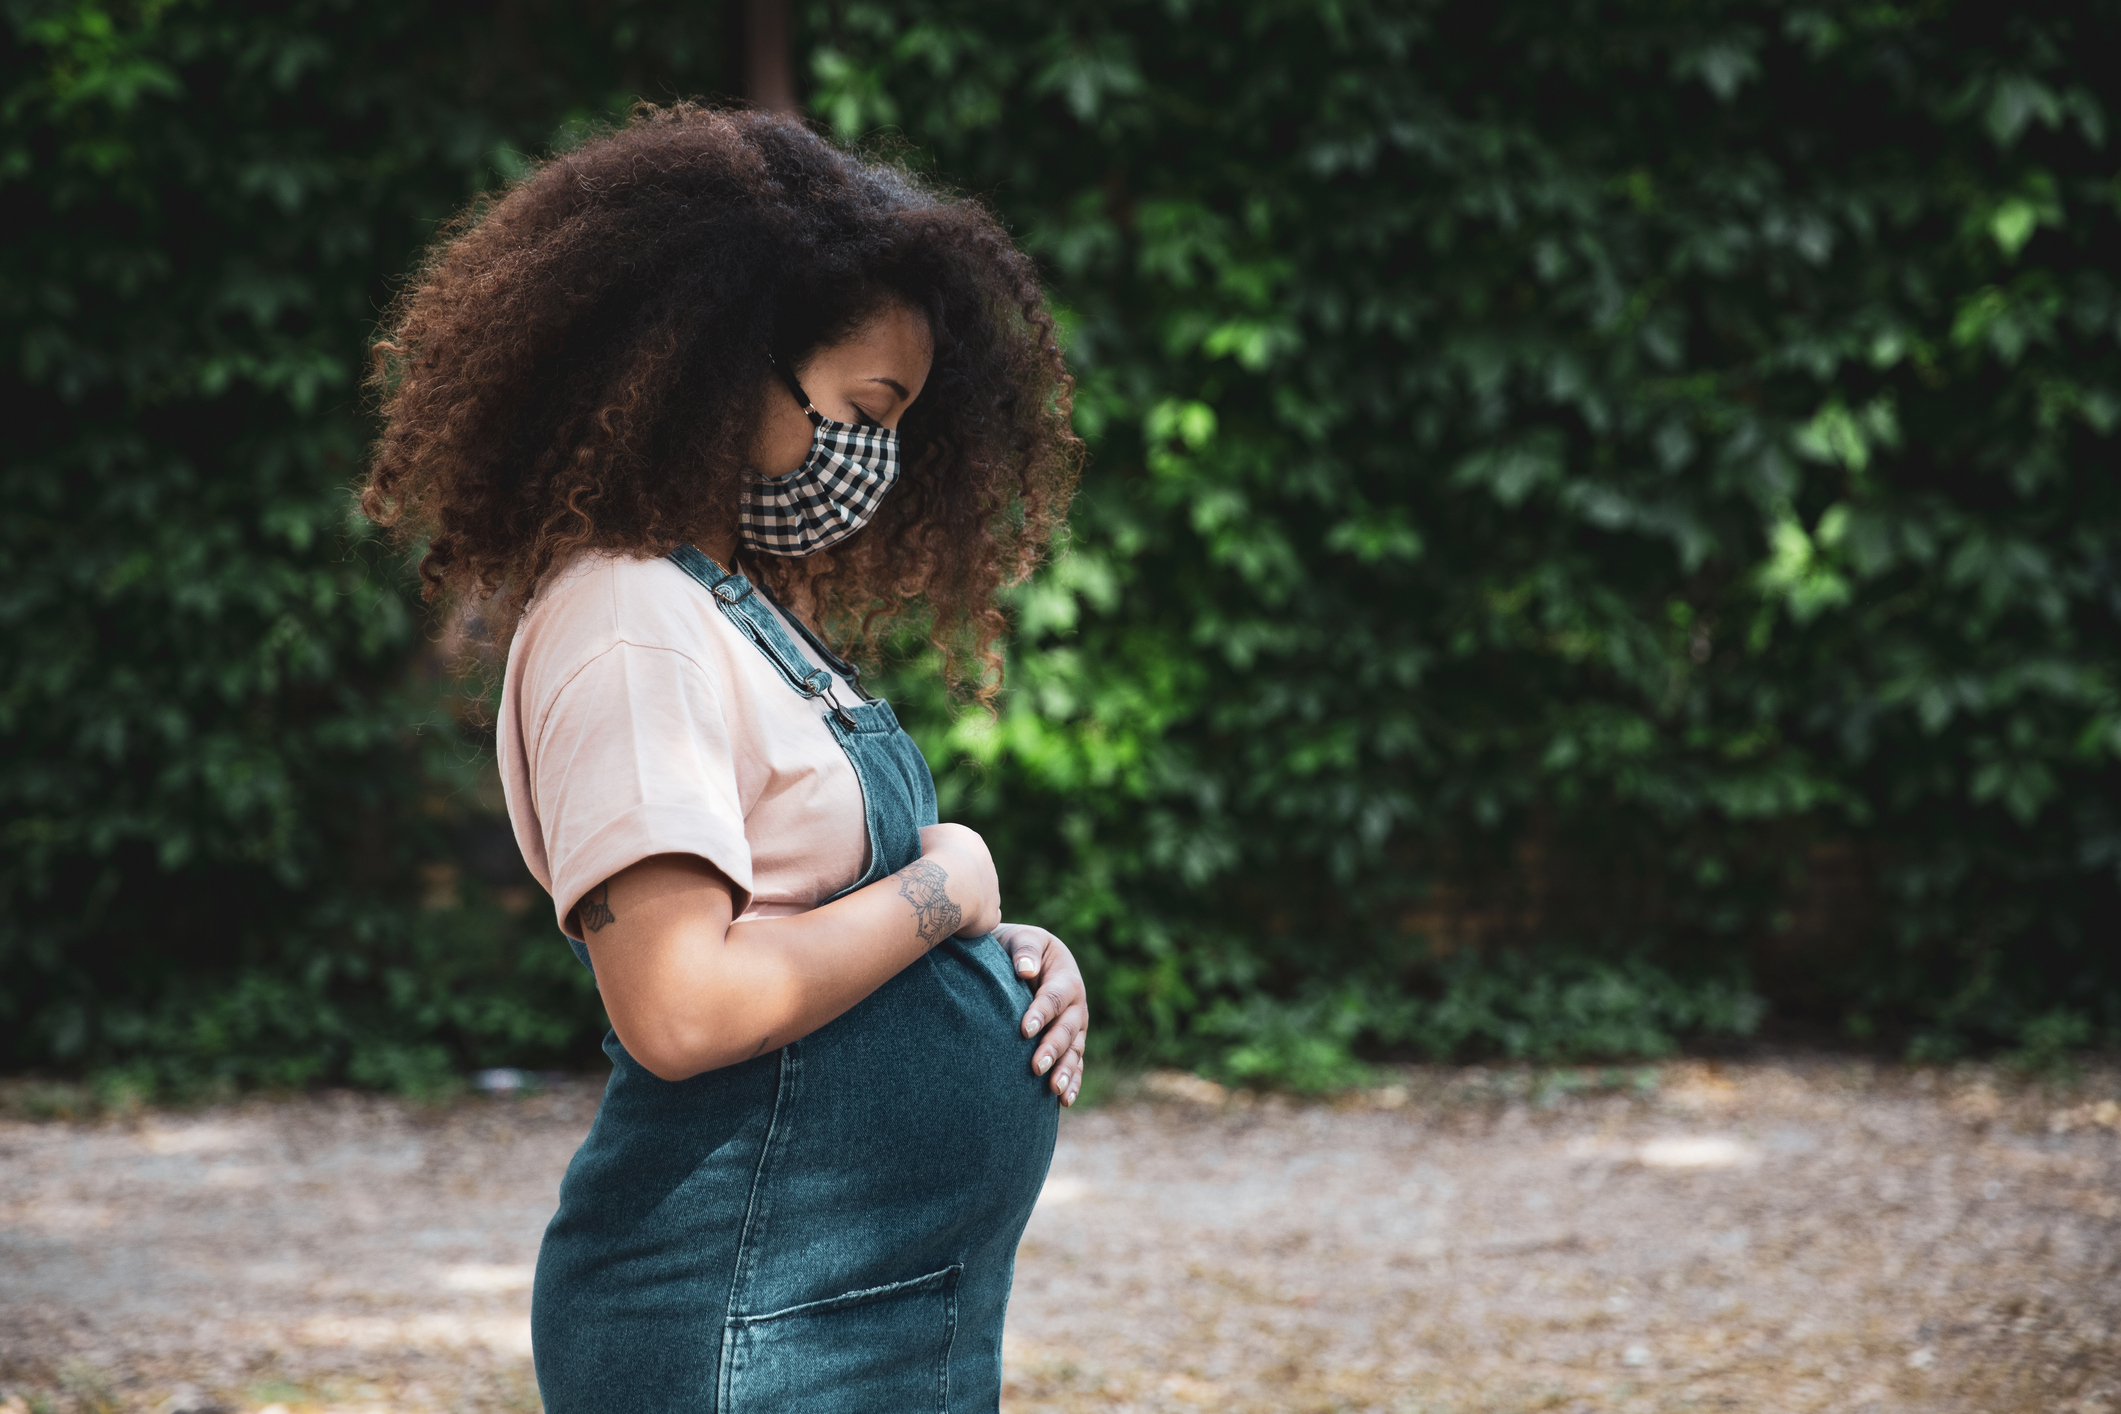 Pregnant afro hair woman in the city wearing a cloth protective mask - stock photo